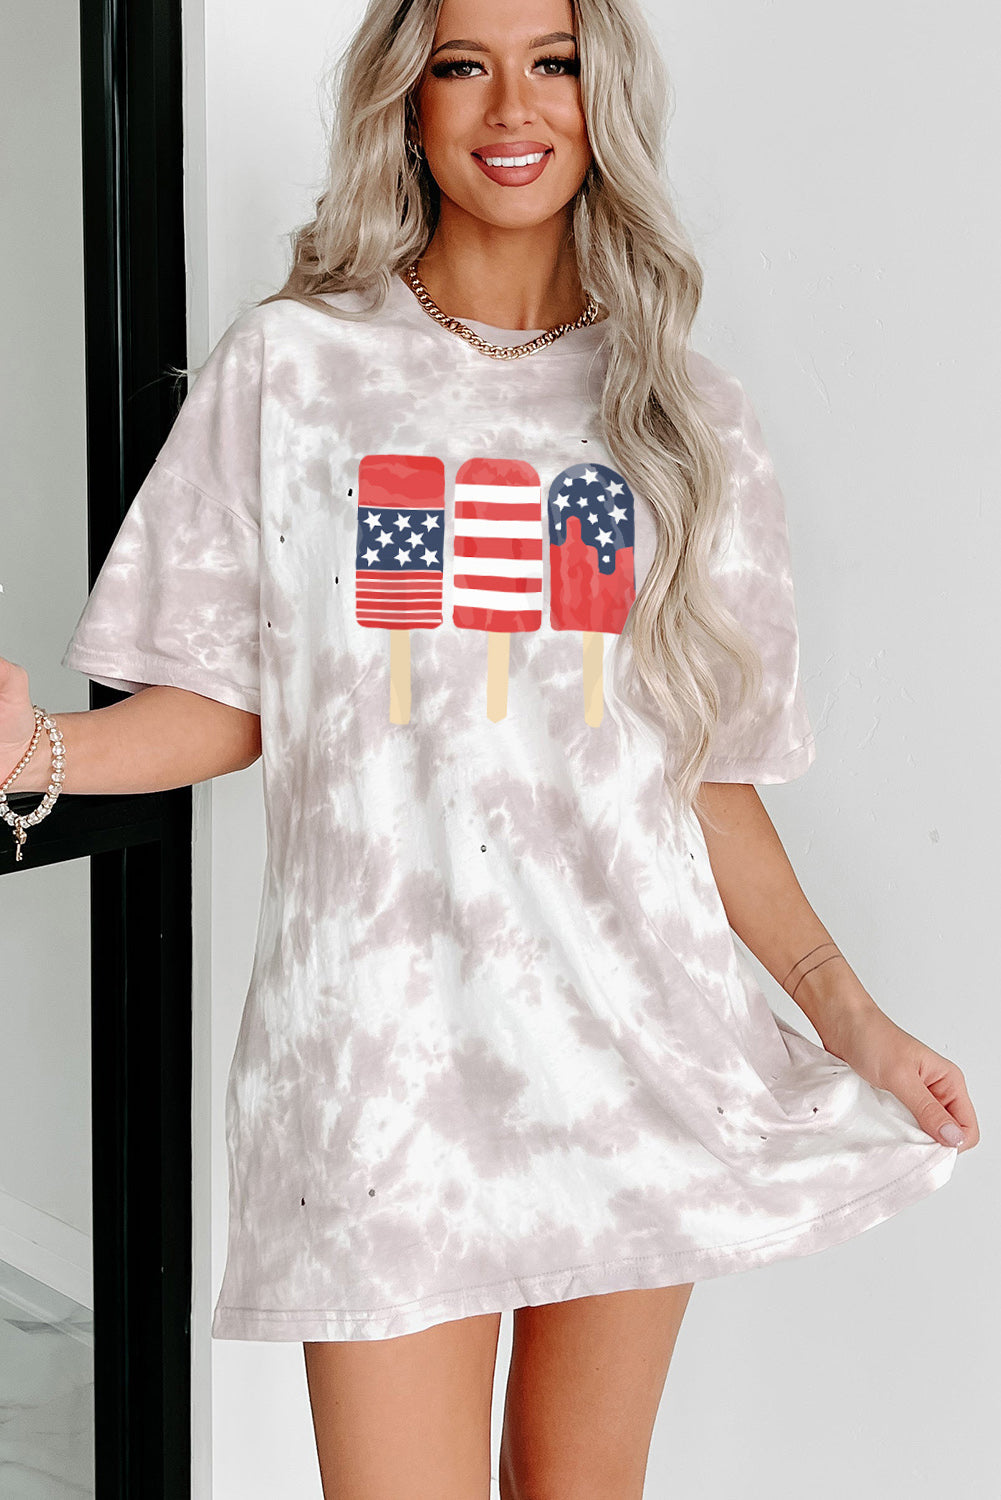 LC25221278-1-S, LC25221278-1-M, LC25221278-1-L, LC25221278-1-XL, White Women's American Flag Casual Oversize Tops Ice Pop Graphic Tie Dye Distressed T Shirt Dress